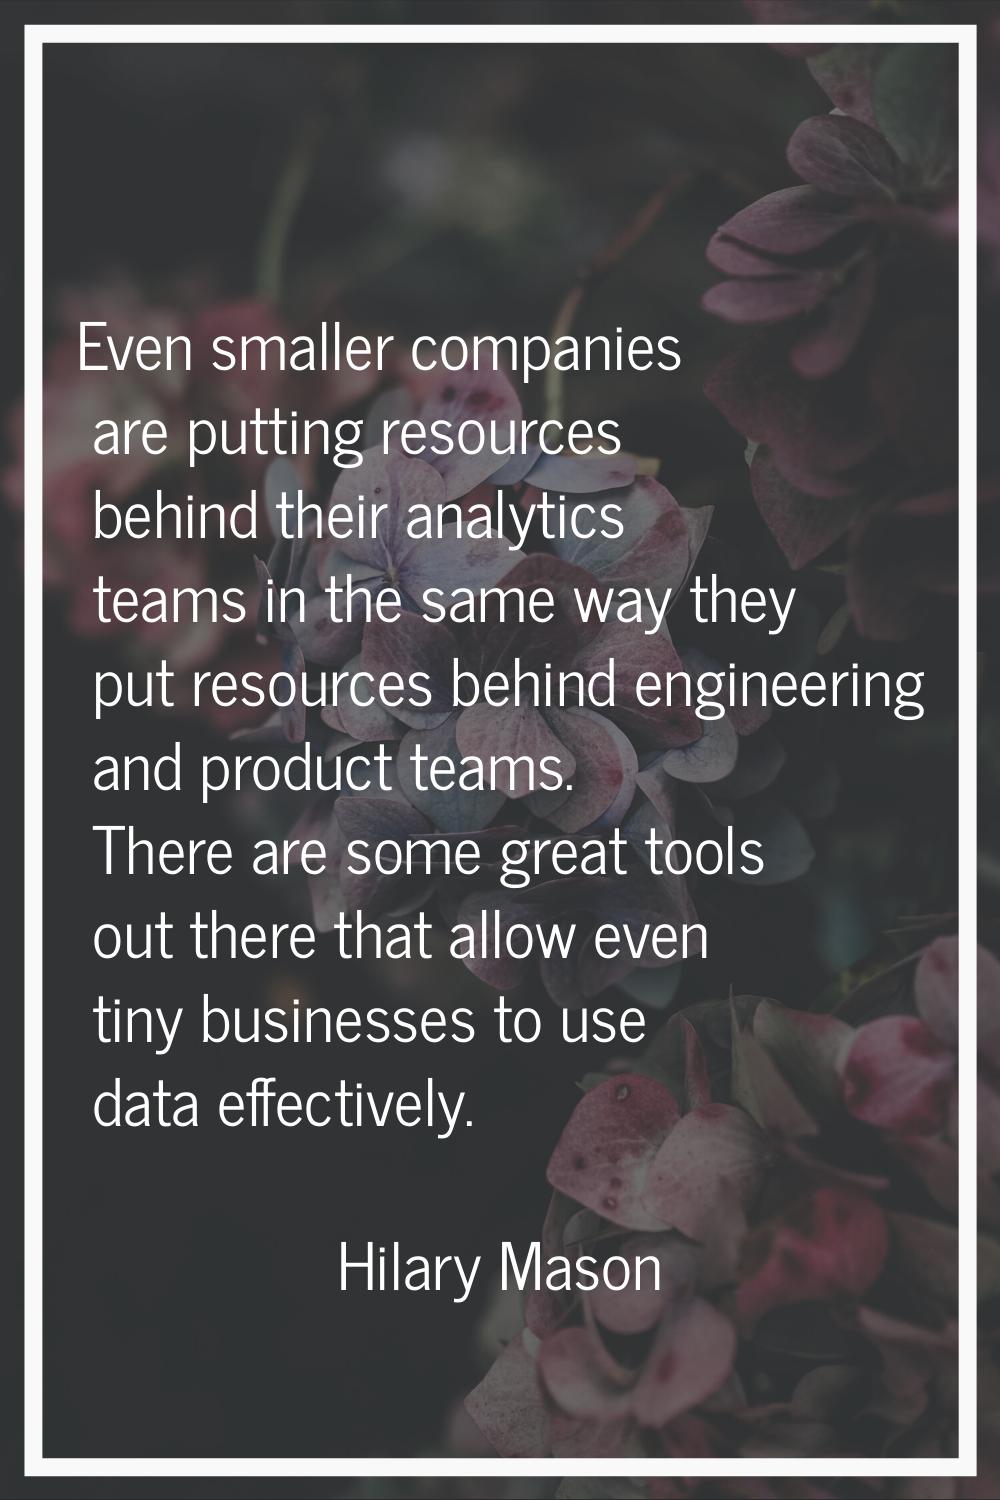 Even smaller companies are putting resources behind their analytics teams in the same way they put 